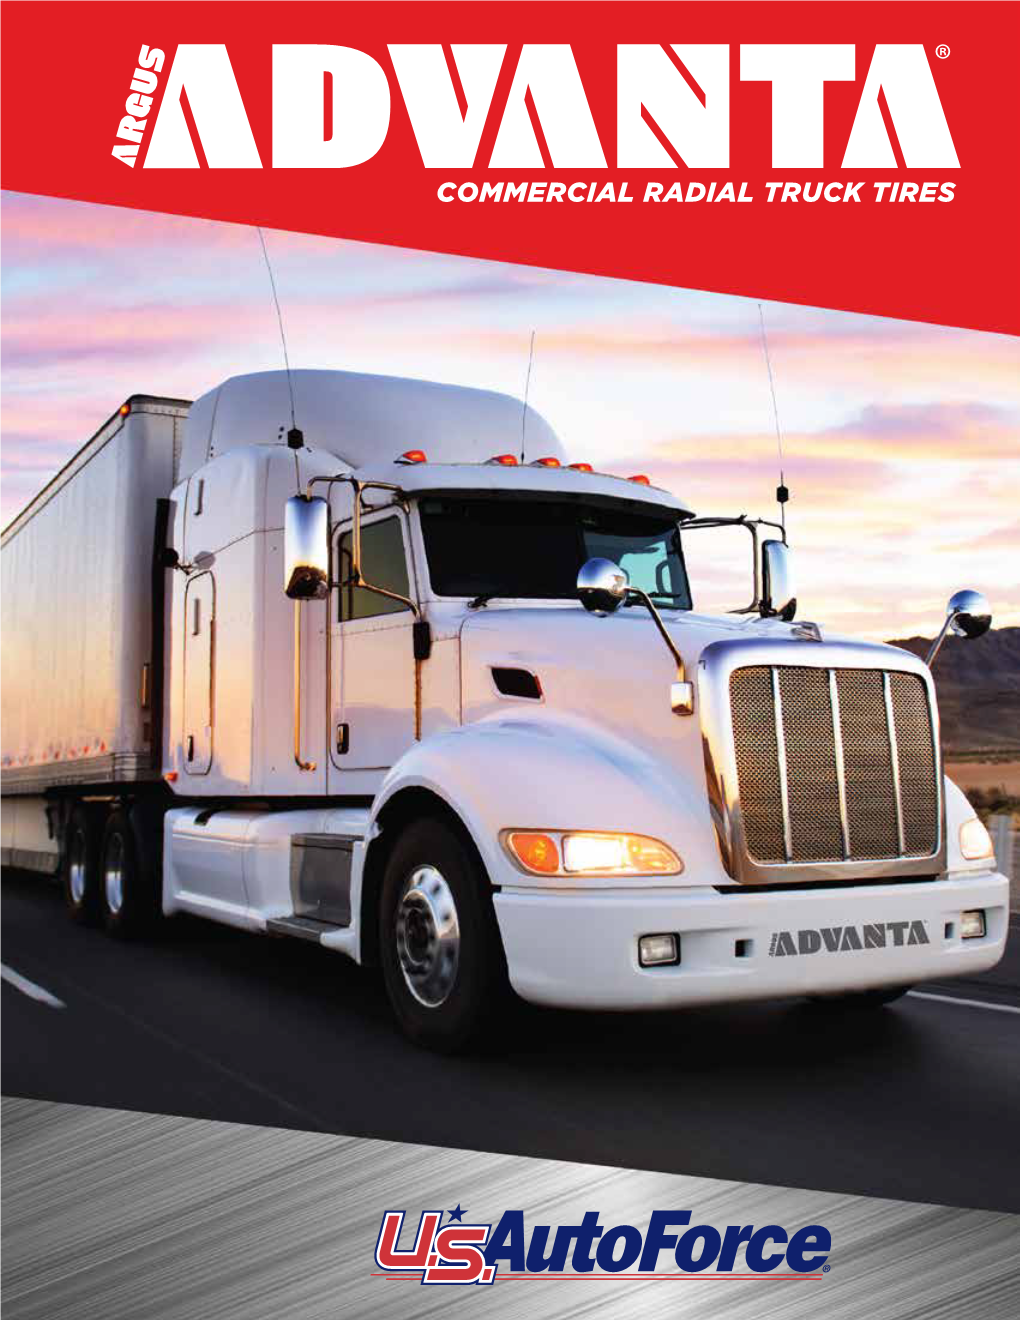 COMMERCIAL RADIAL TRUCK TIRES COMMERCIAL RADIAL TRUCK TIRES ® • All-Position Steel-Belted Radial Tire Best AV2000S Suited for Steer Axle Applications